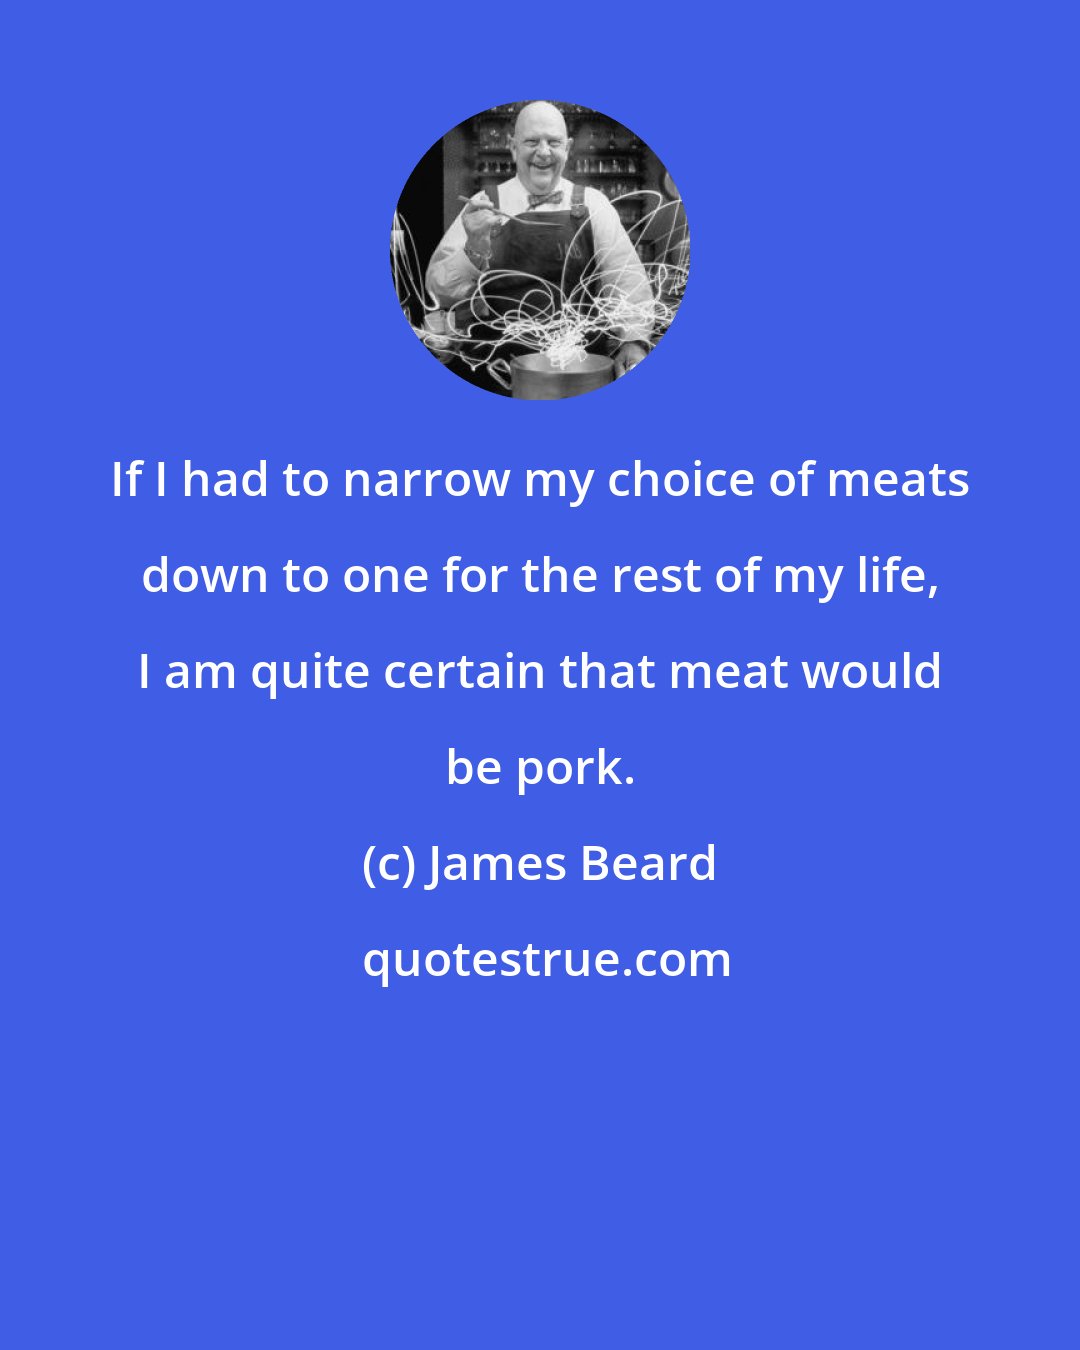 James Beard: If I had to narrow my choice of meats down to one for the rest of my life, I am quite certain that meat would be pork.